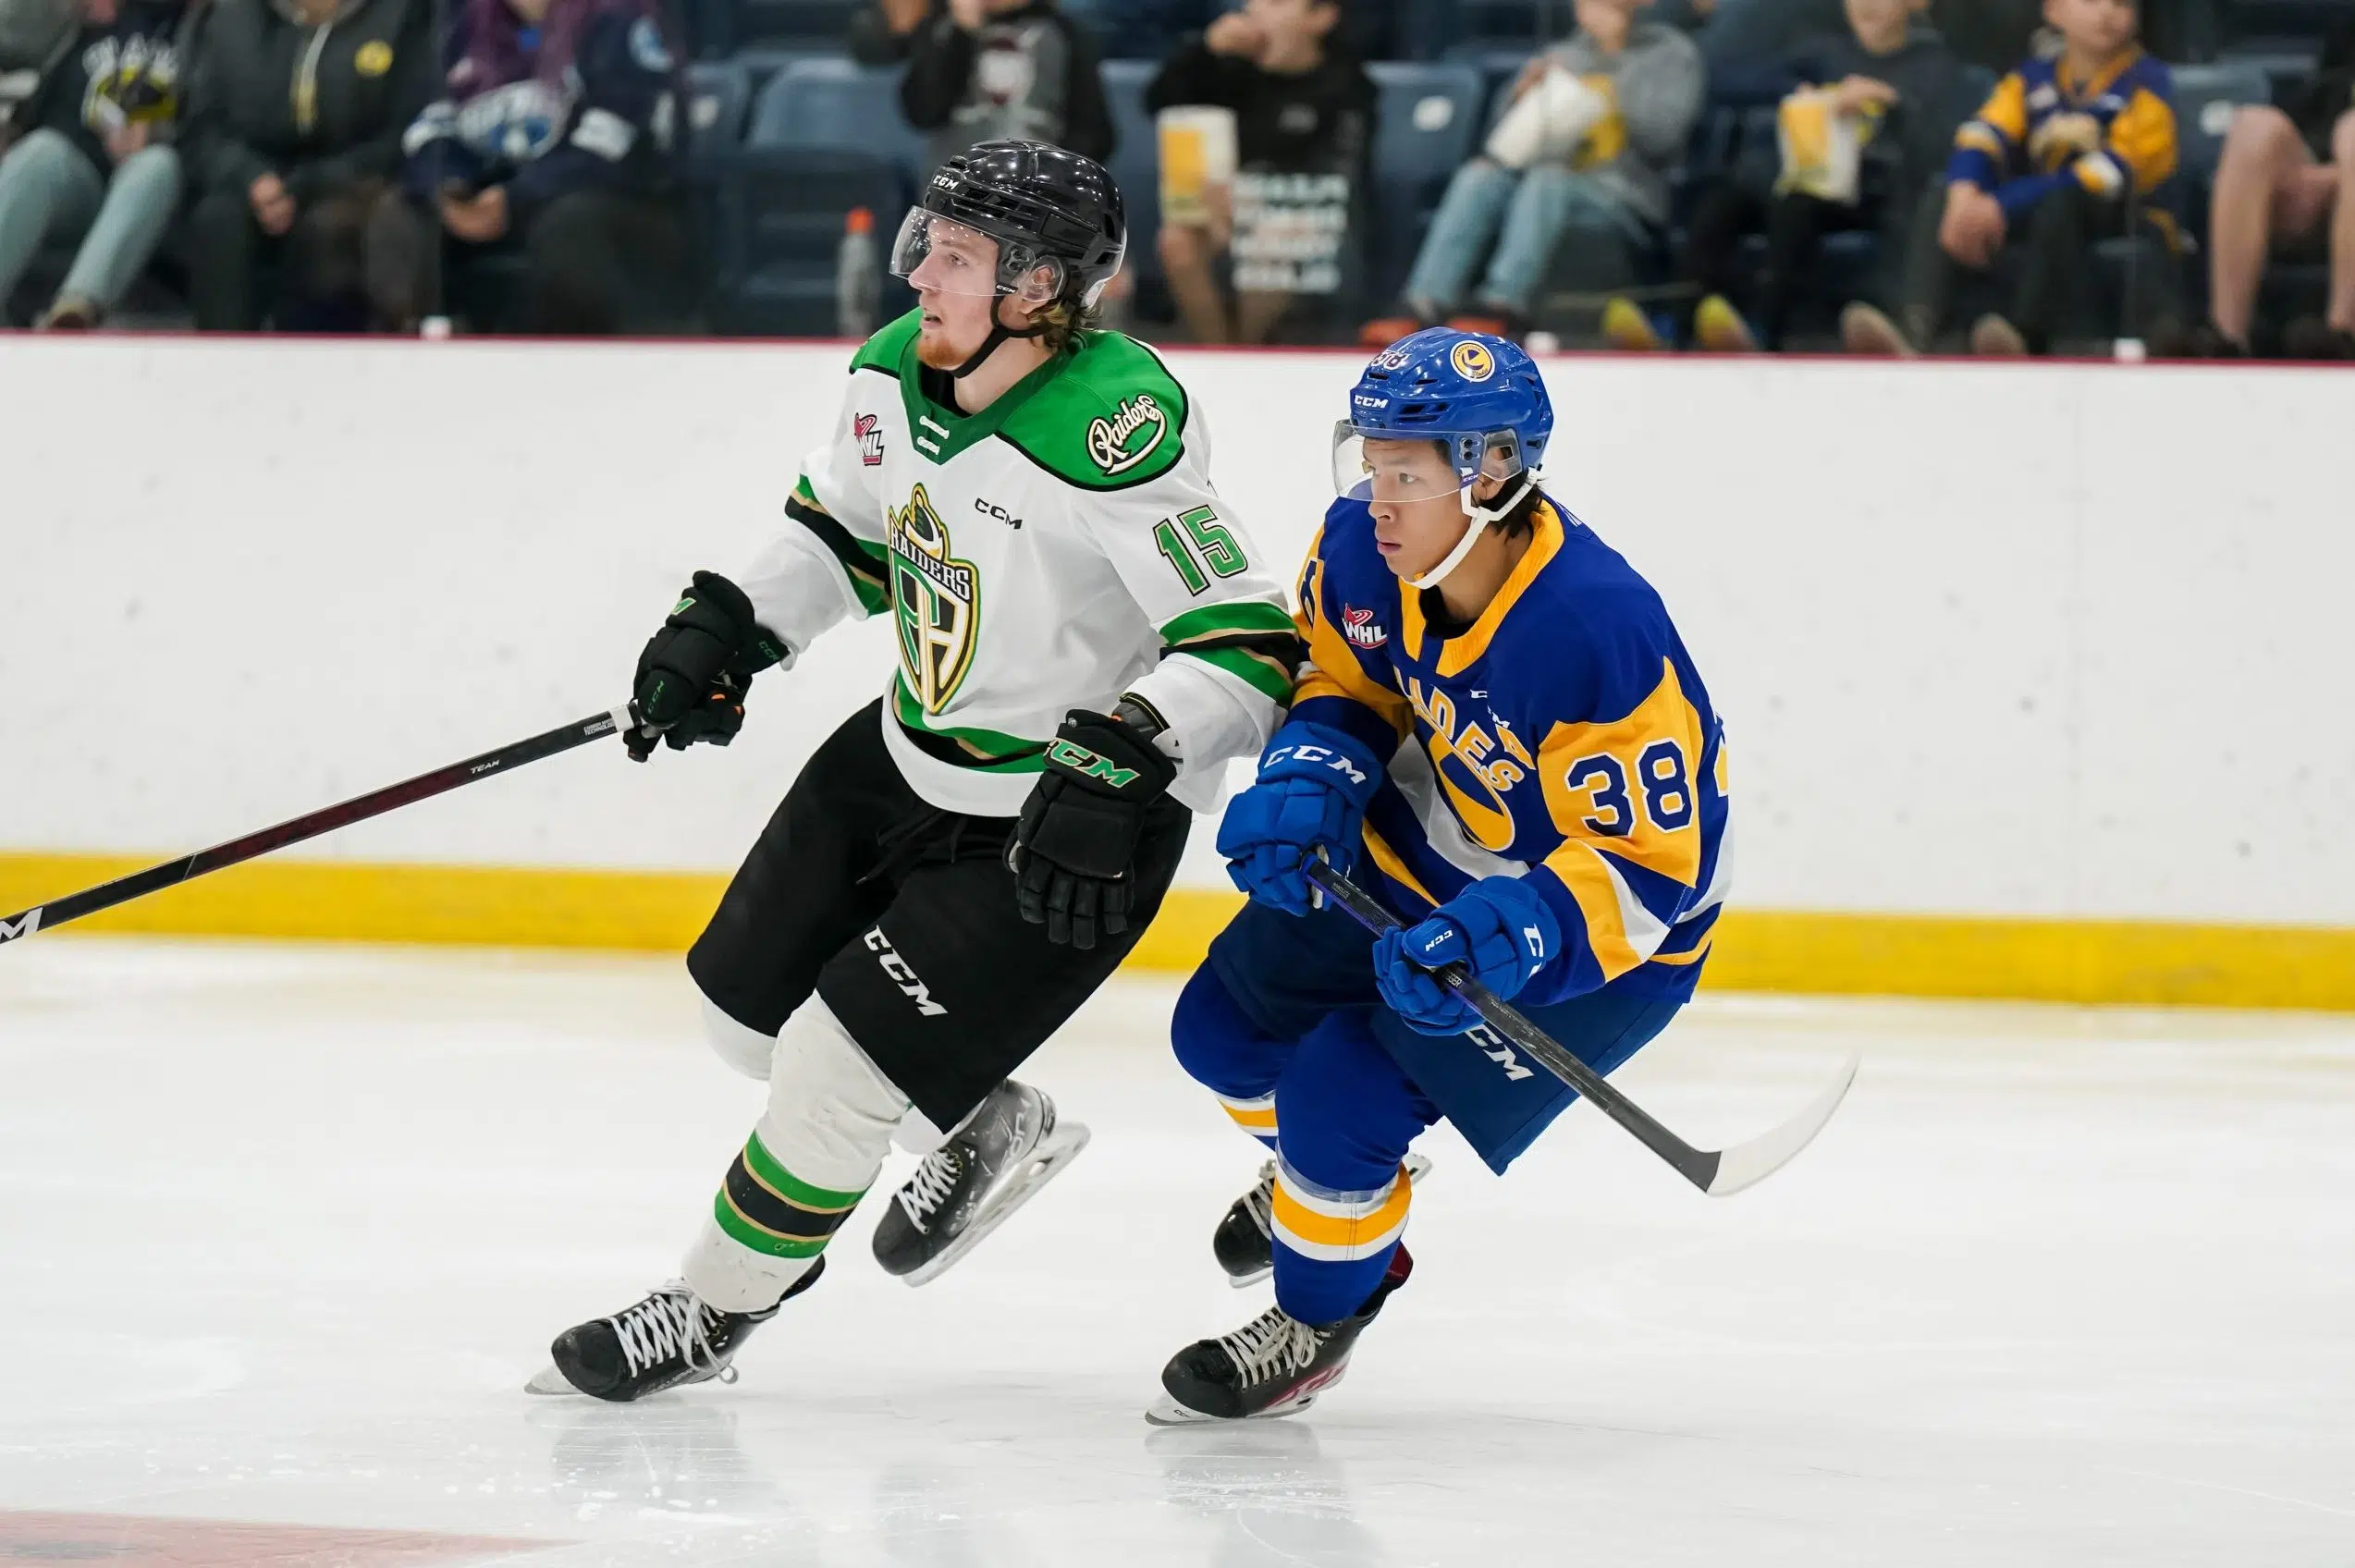 Blades finish weekend with two wins, continue homestand Friday